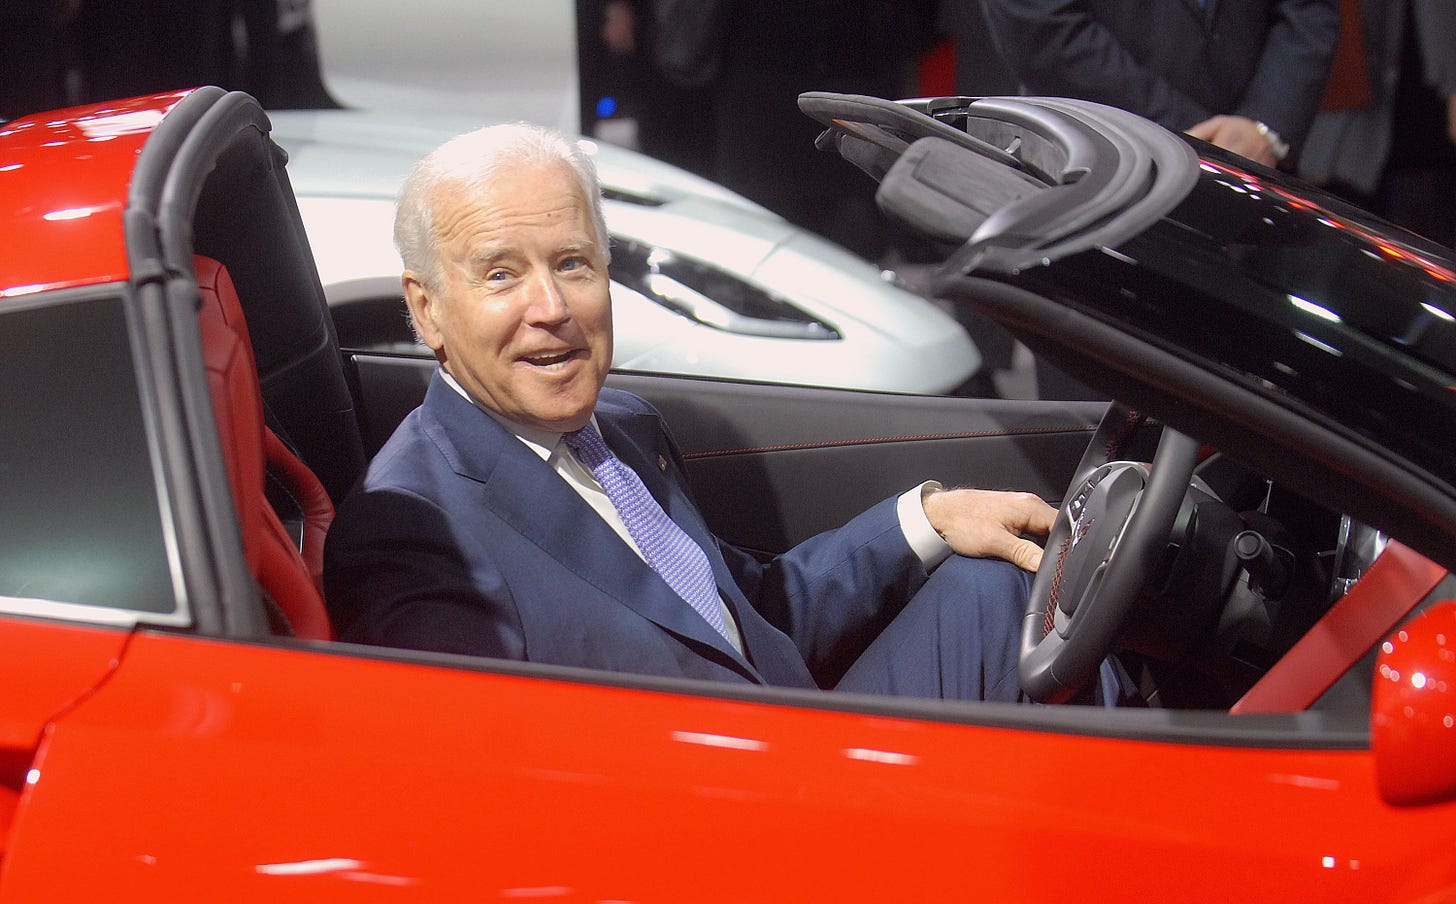 Biden Presidency Likely to Mean More EVs, Auto-Industry Stability